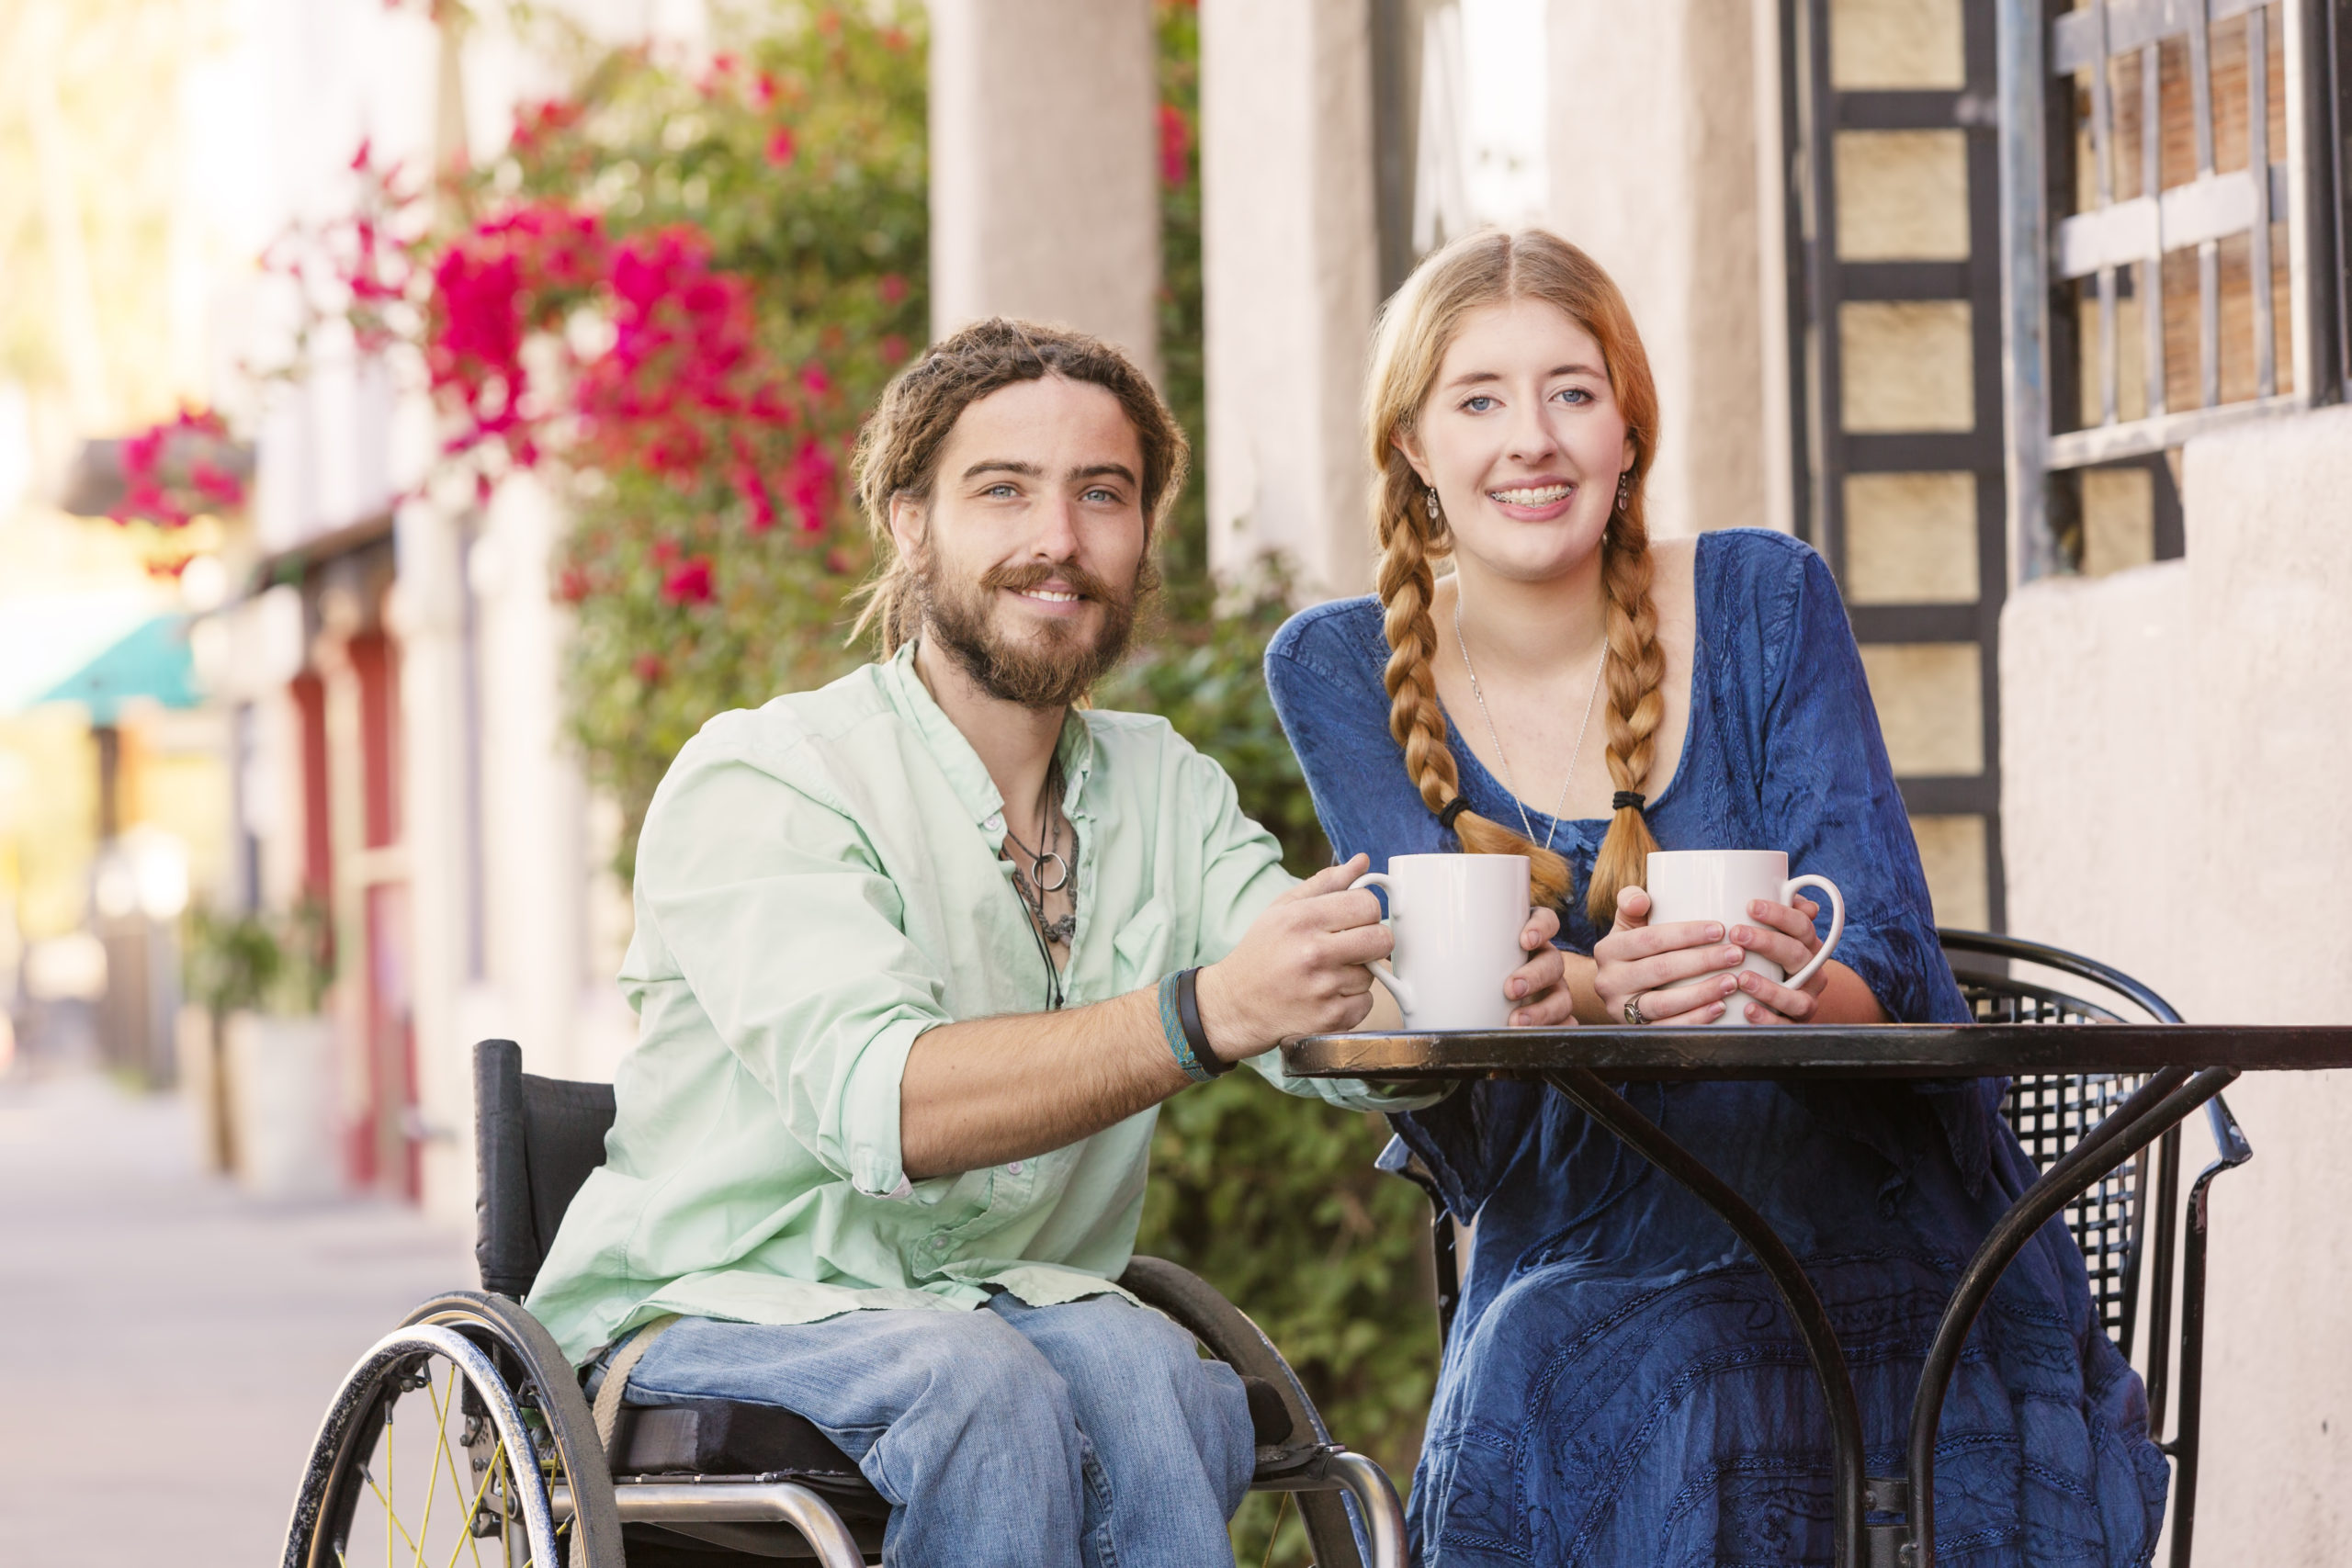 Your Guide to Disabled Access in Restaurants | The Training Terminal